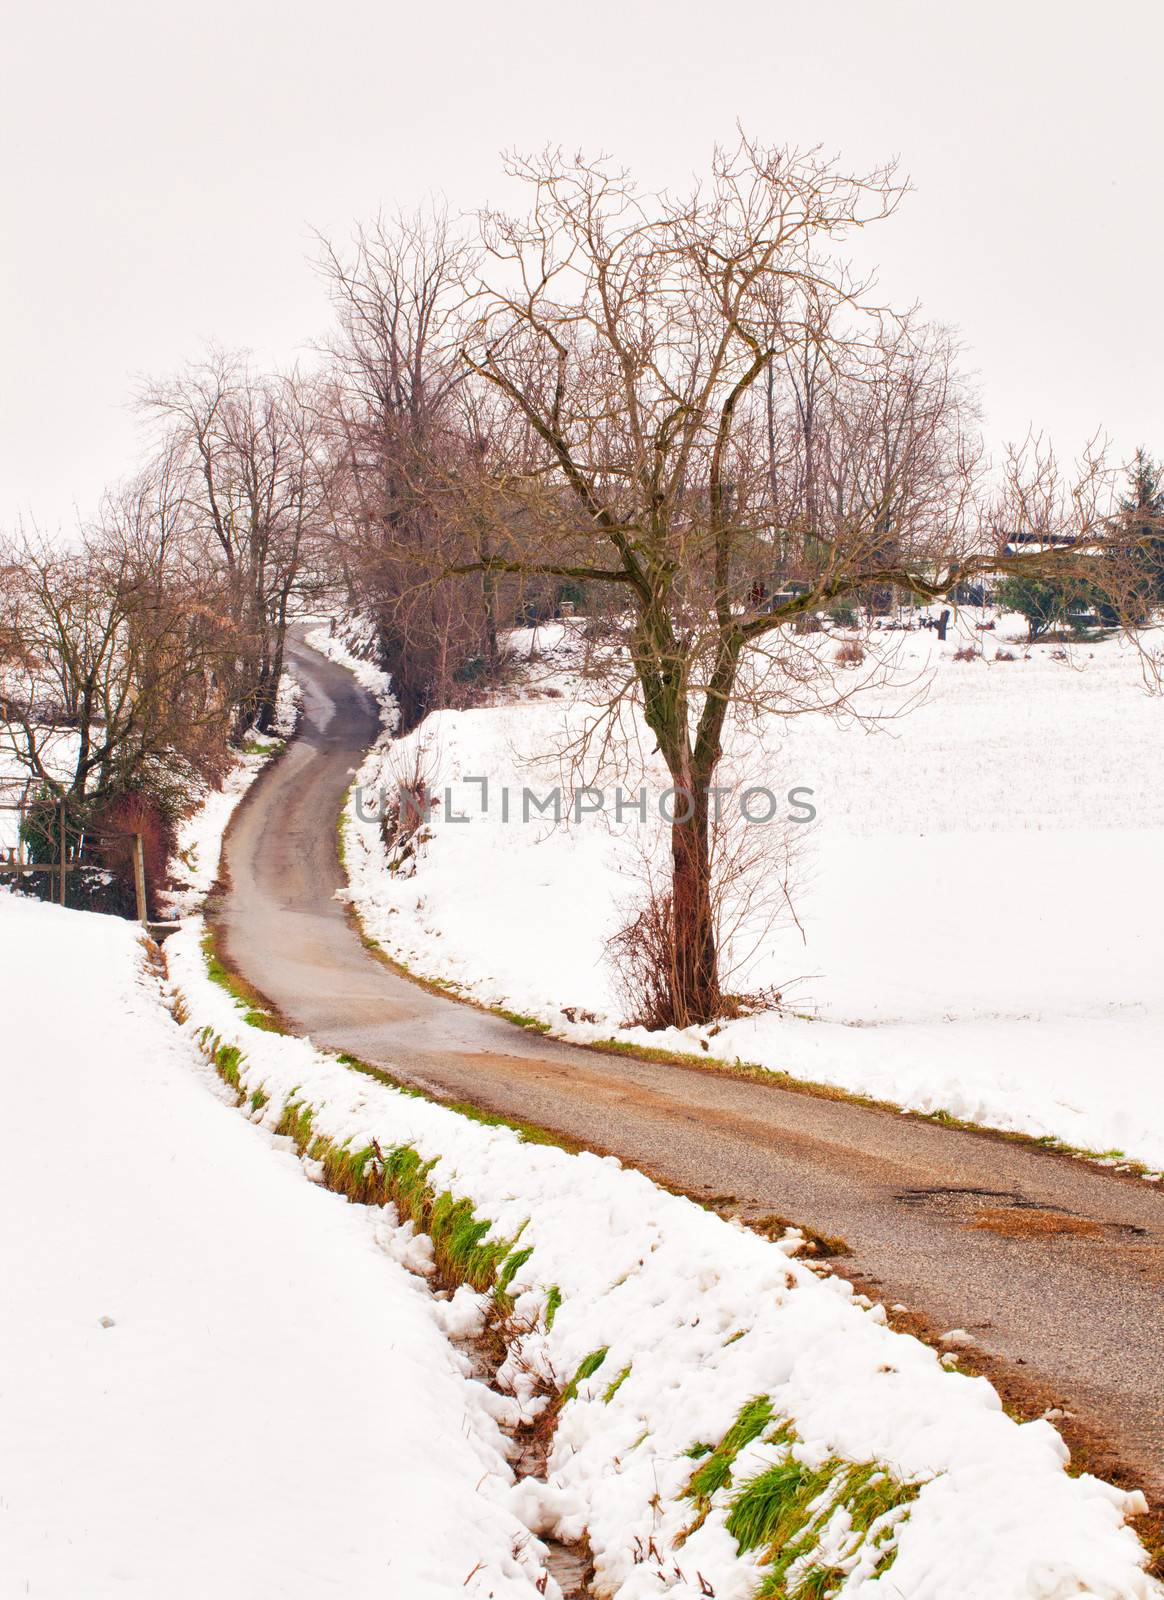 Road in the snow by Koufax73